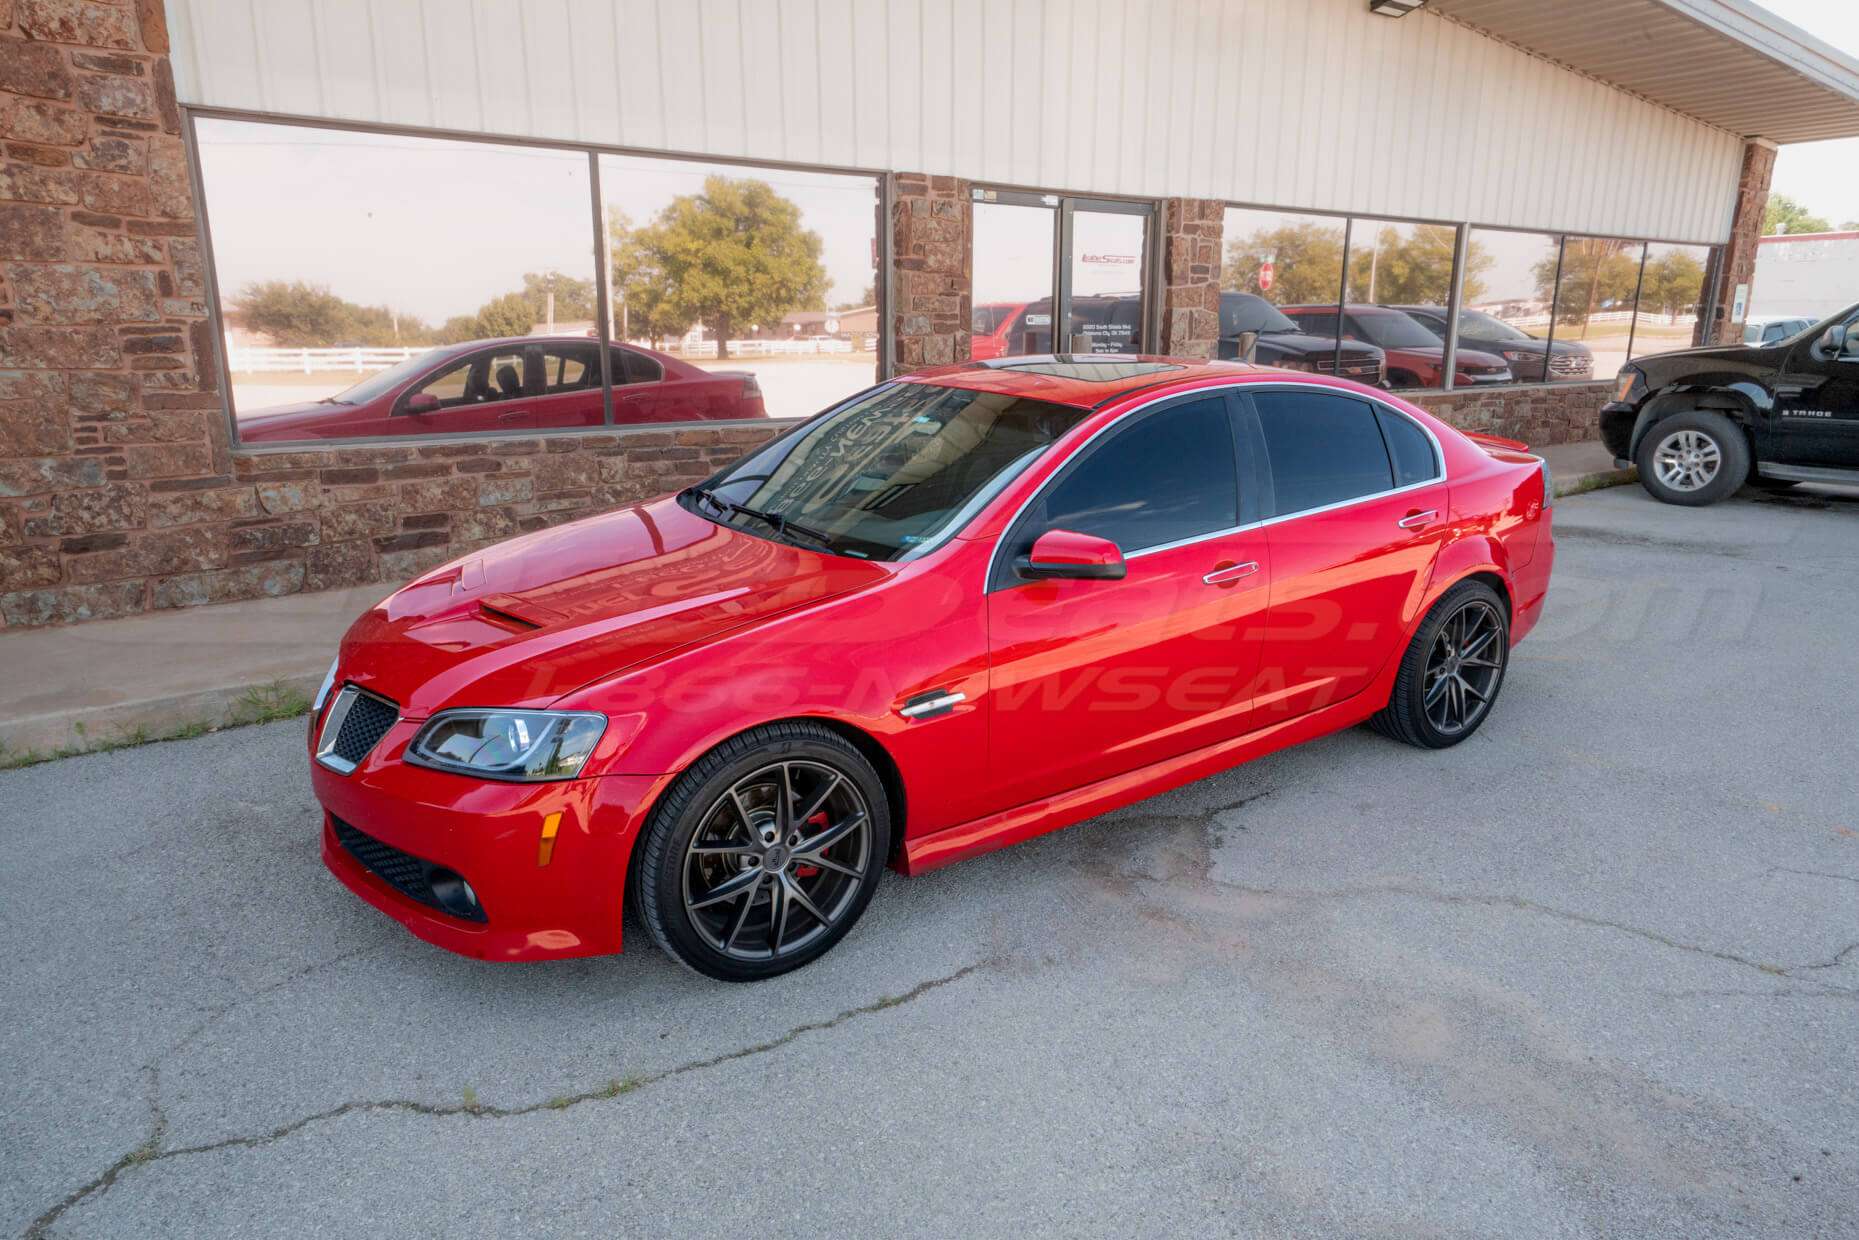 2009 Pontiac G8 GT with LeatherSeats.com custom seats - Bright Red exterior